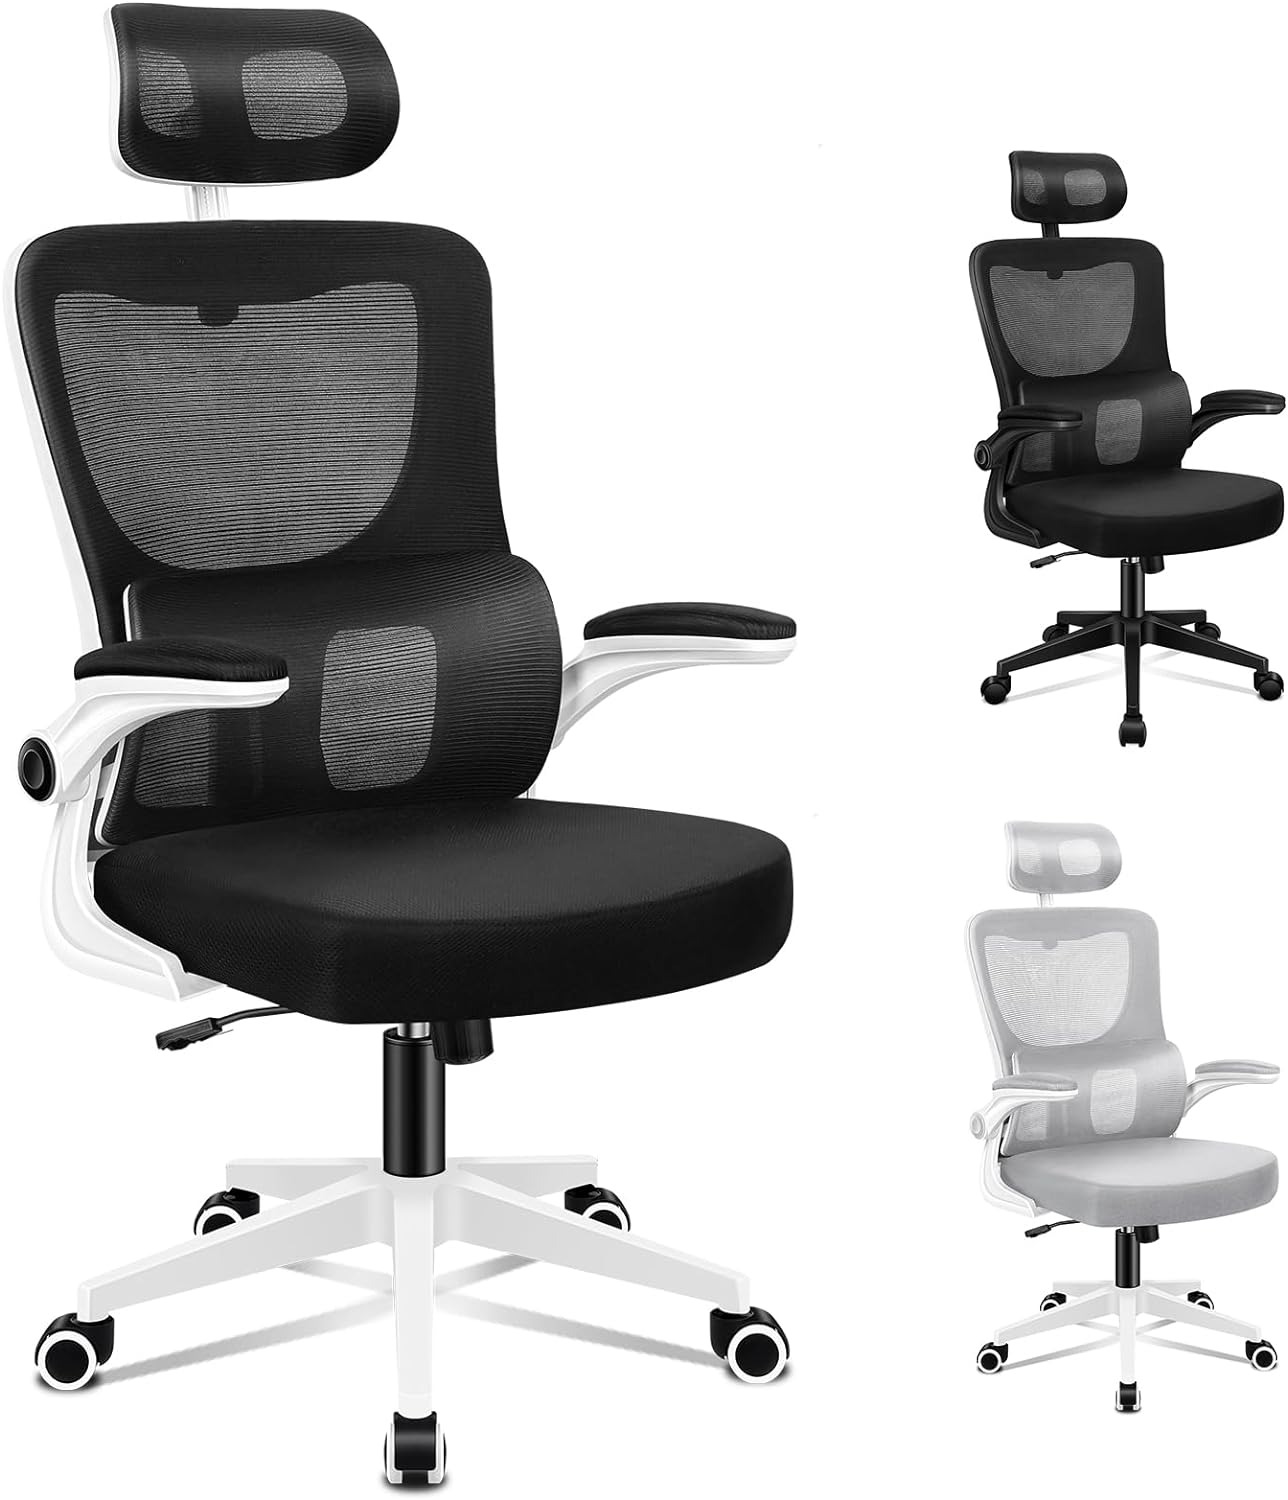 Ergonomic Office Chair Mesh for Home Office, Mid-Back Student Computer Study Des